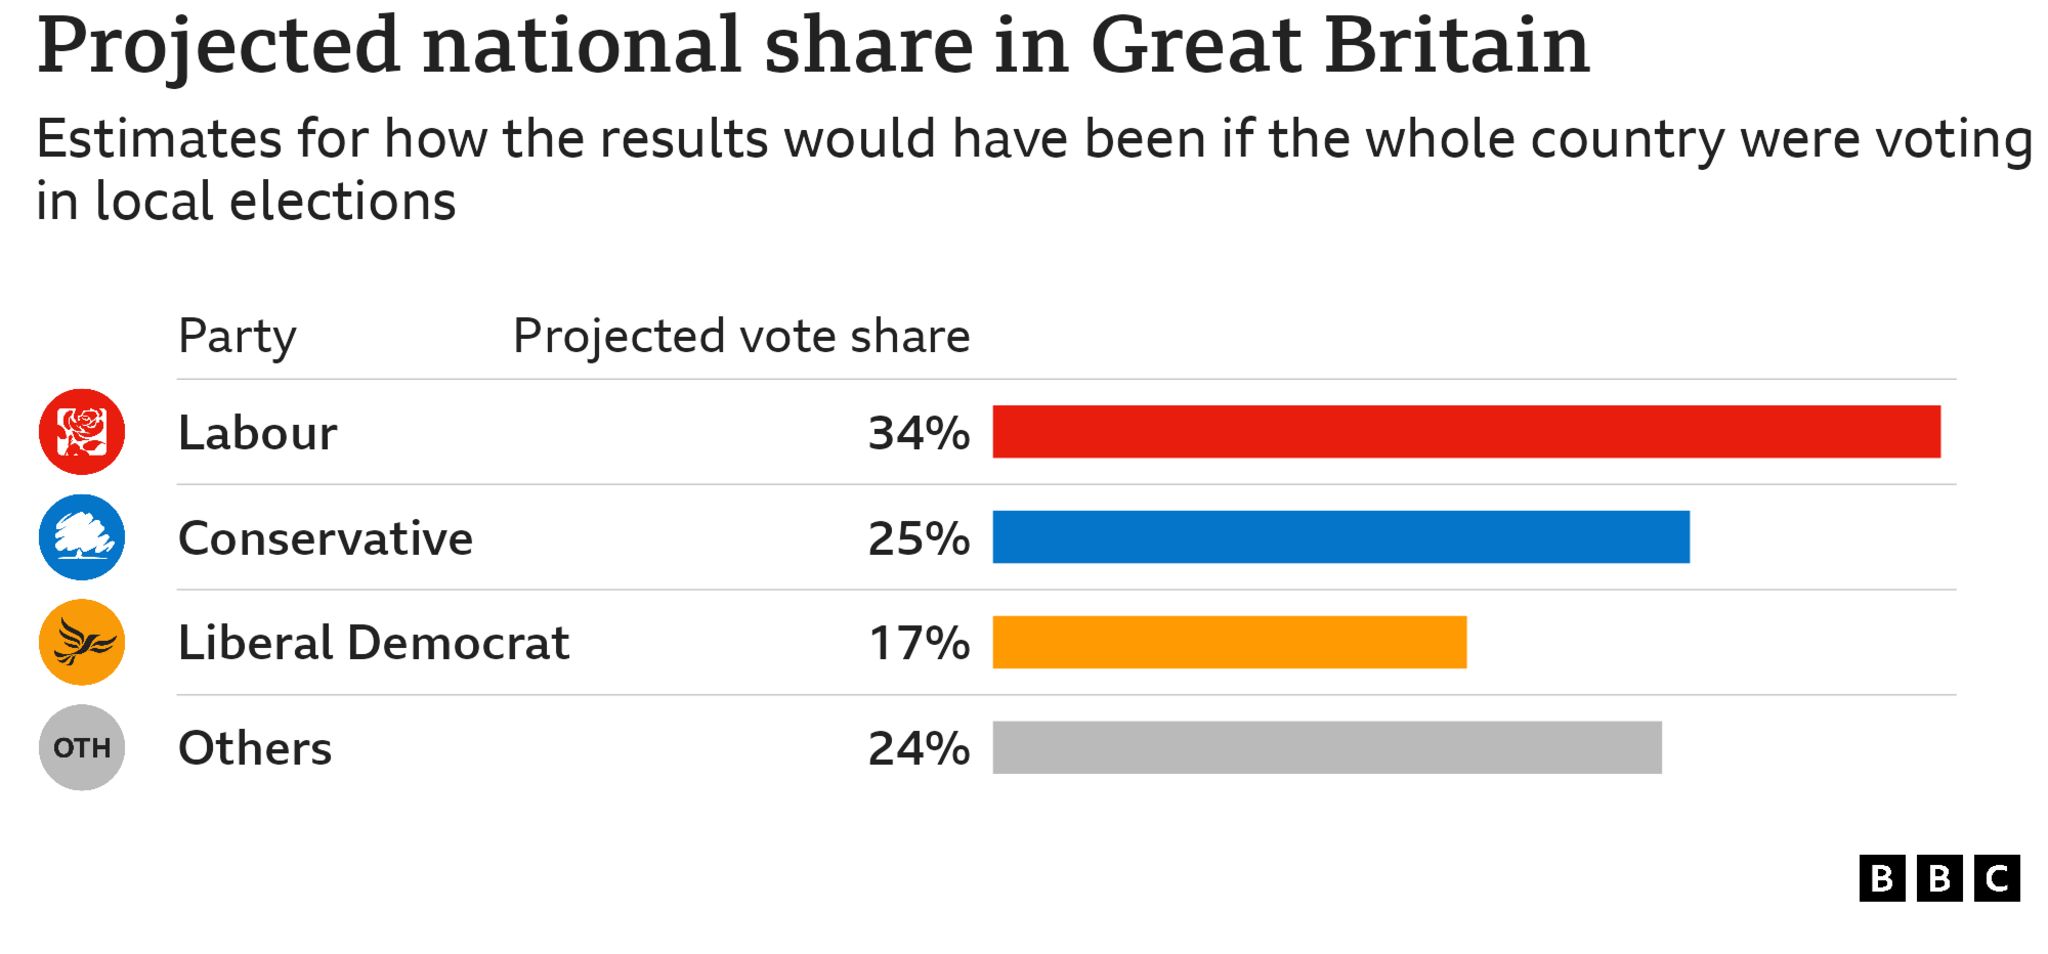 Chart showing estimates for how the election results would have translated if the whole country were voting in local elections. Labour projected share 34%, Conservative projected share 25%, Liberal Democrat projected share 17%, Others projected share 24%